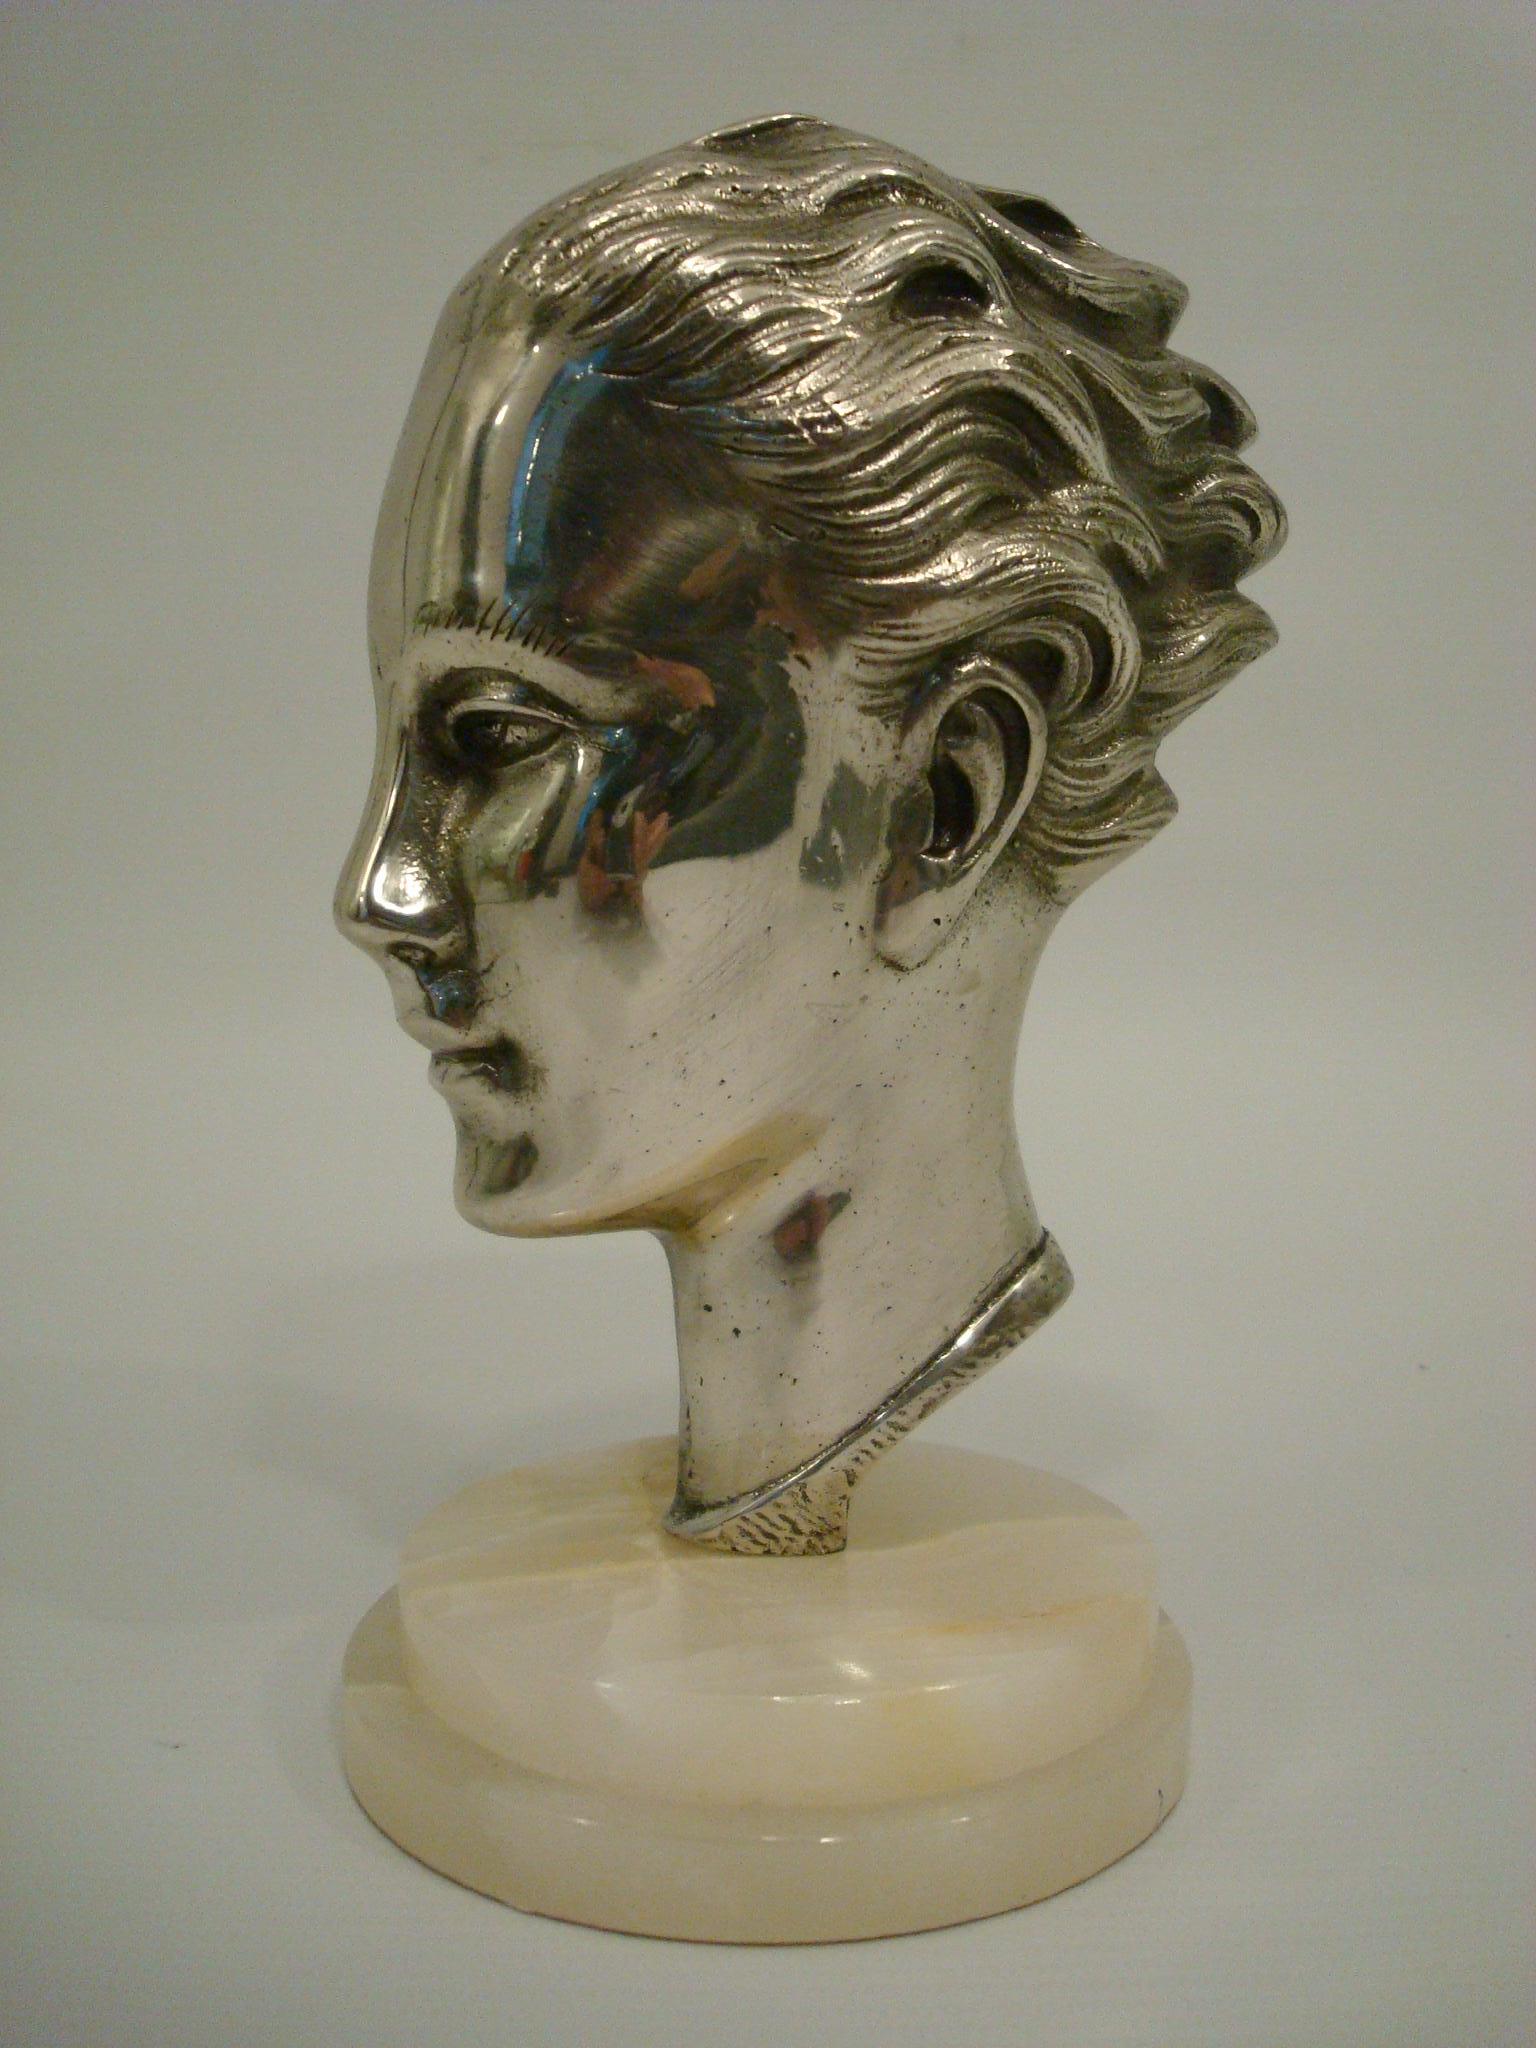 Art Deco / Midcentury Silvered Bronze Bust - France 1930´s.
Silvered Bronze Head mounted over Onyx Marble.
Very nice Sculpture, perfect for a desk or a side table. Can be used as a paperweight.
